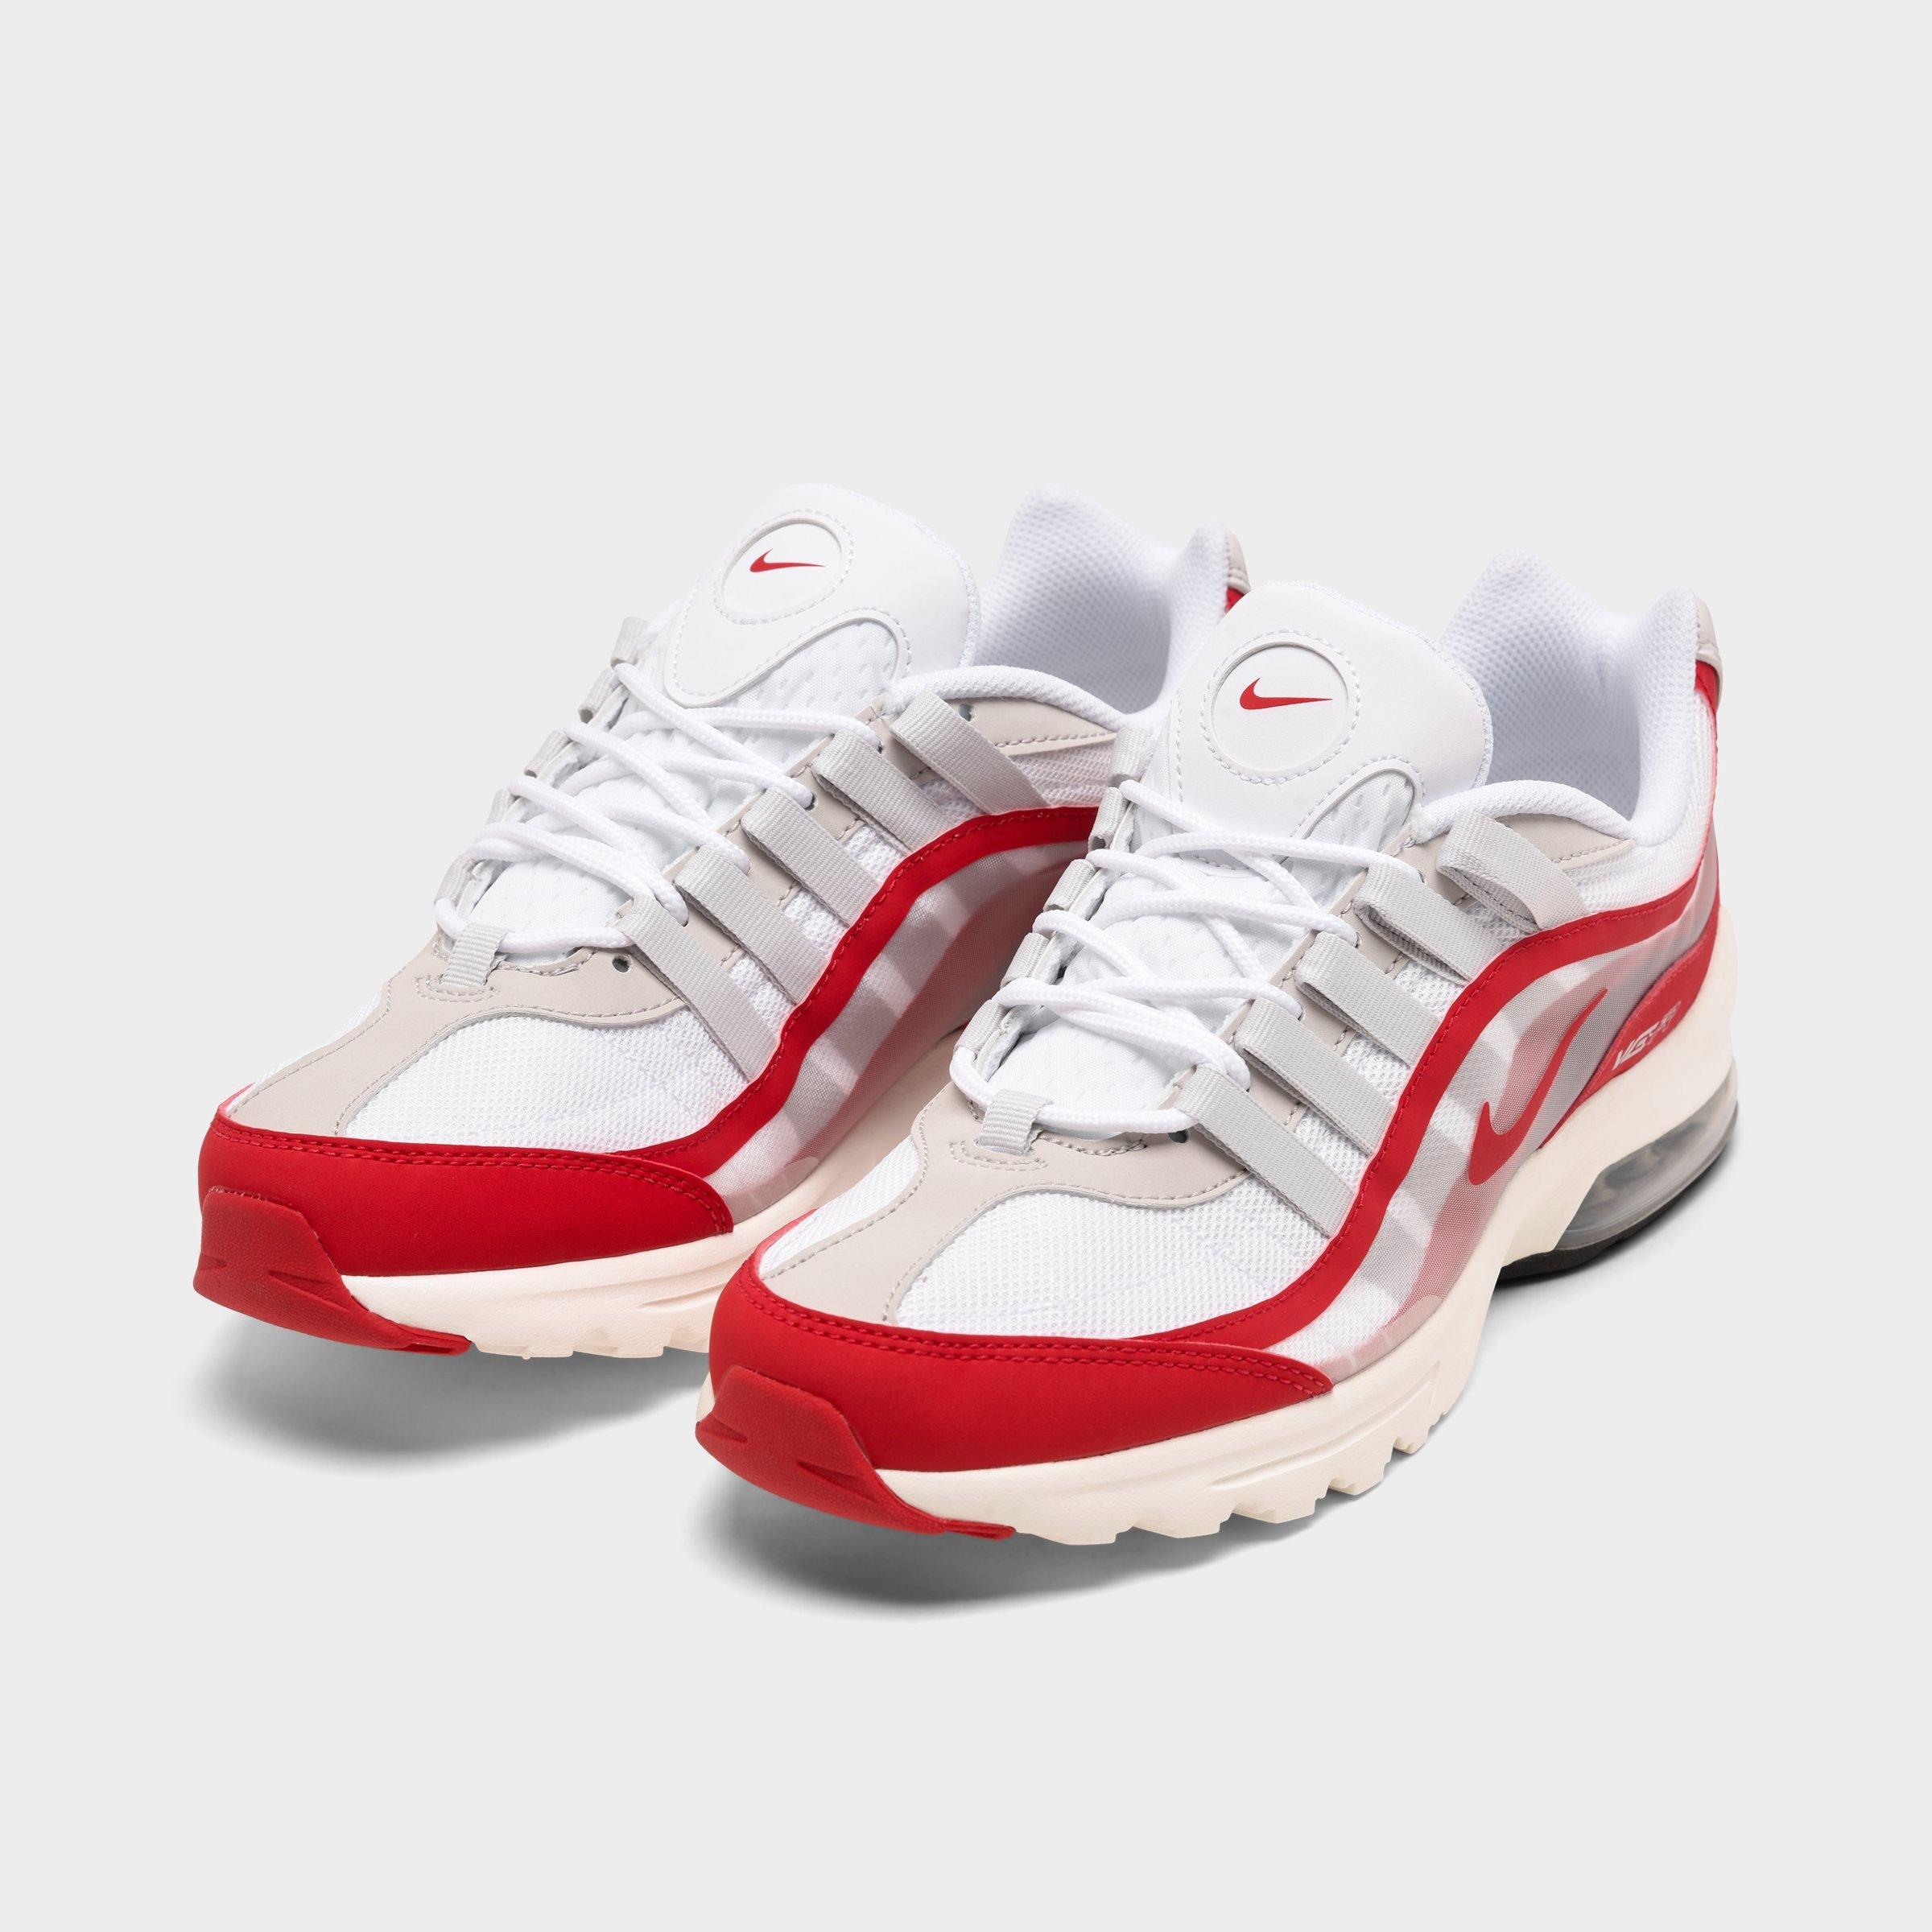 finish line red air max